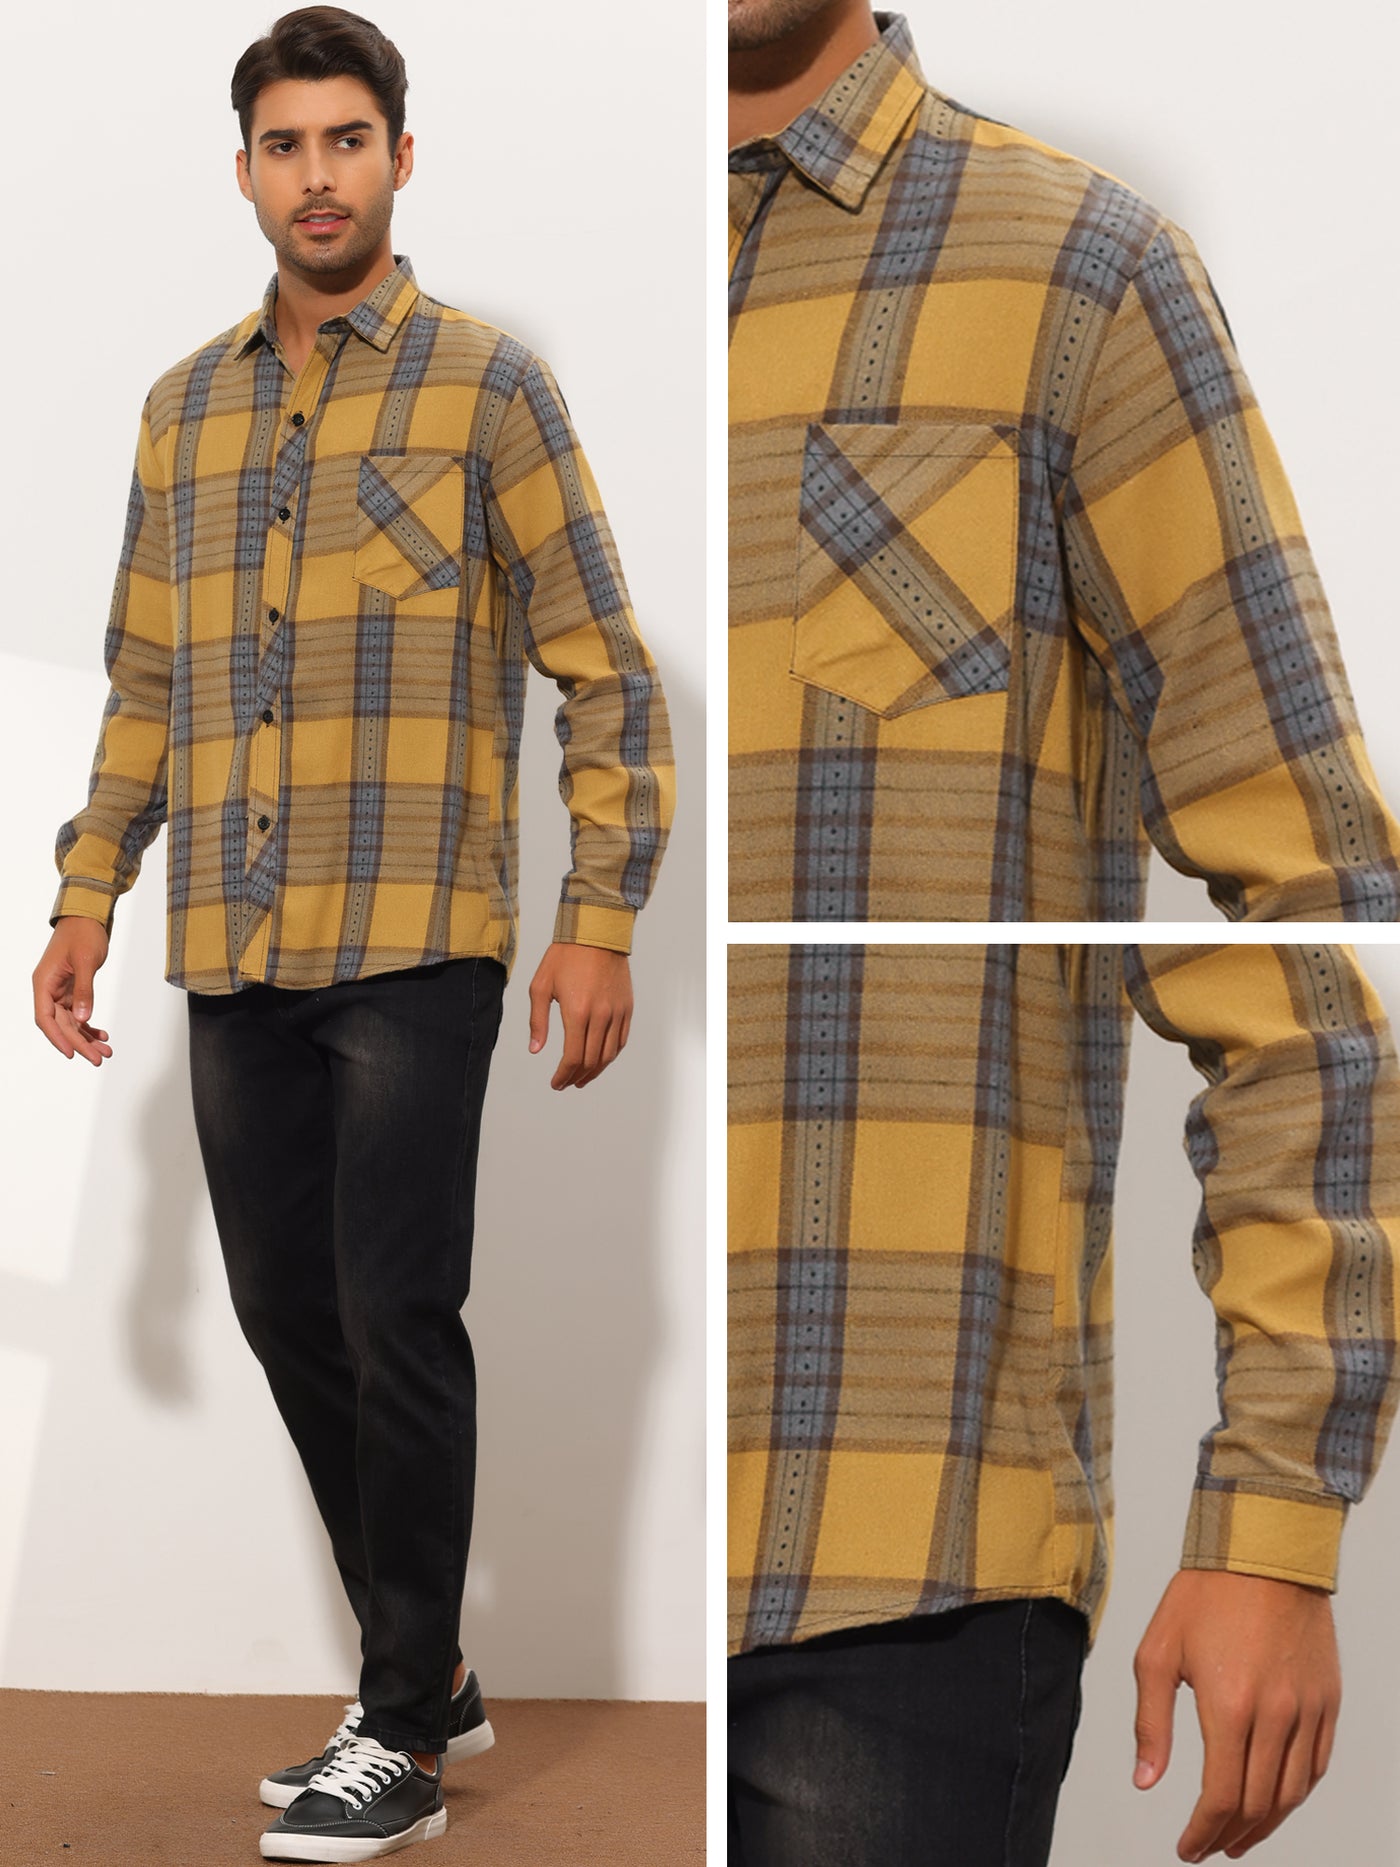 Bublédon Men's Plaid Casual Long Sleeve Button Up Western Checkered Shirts